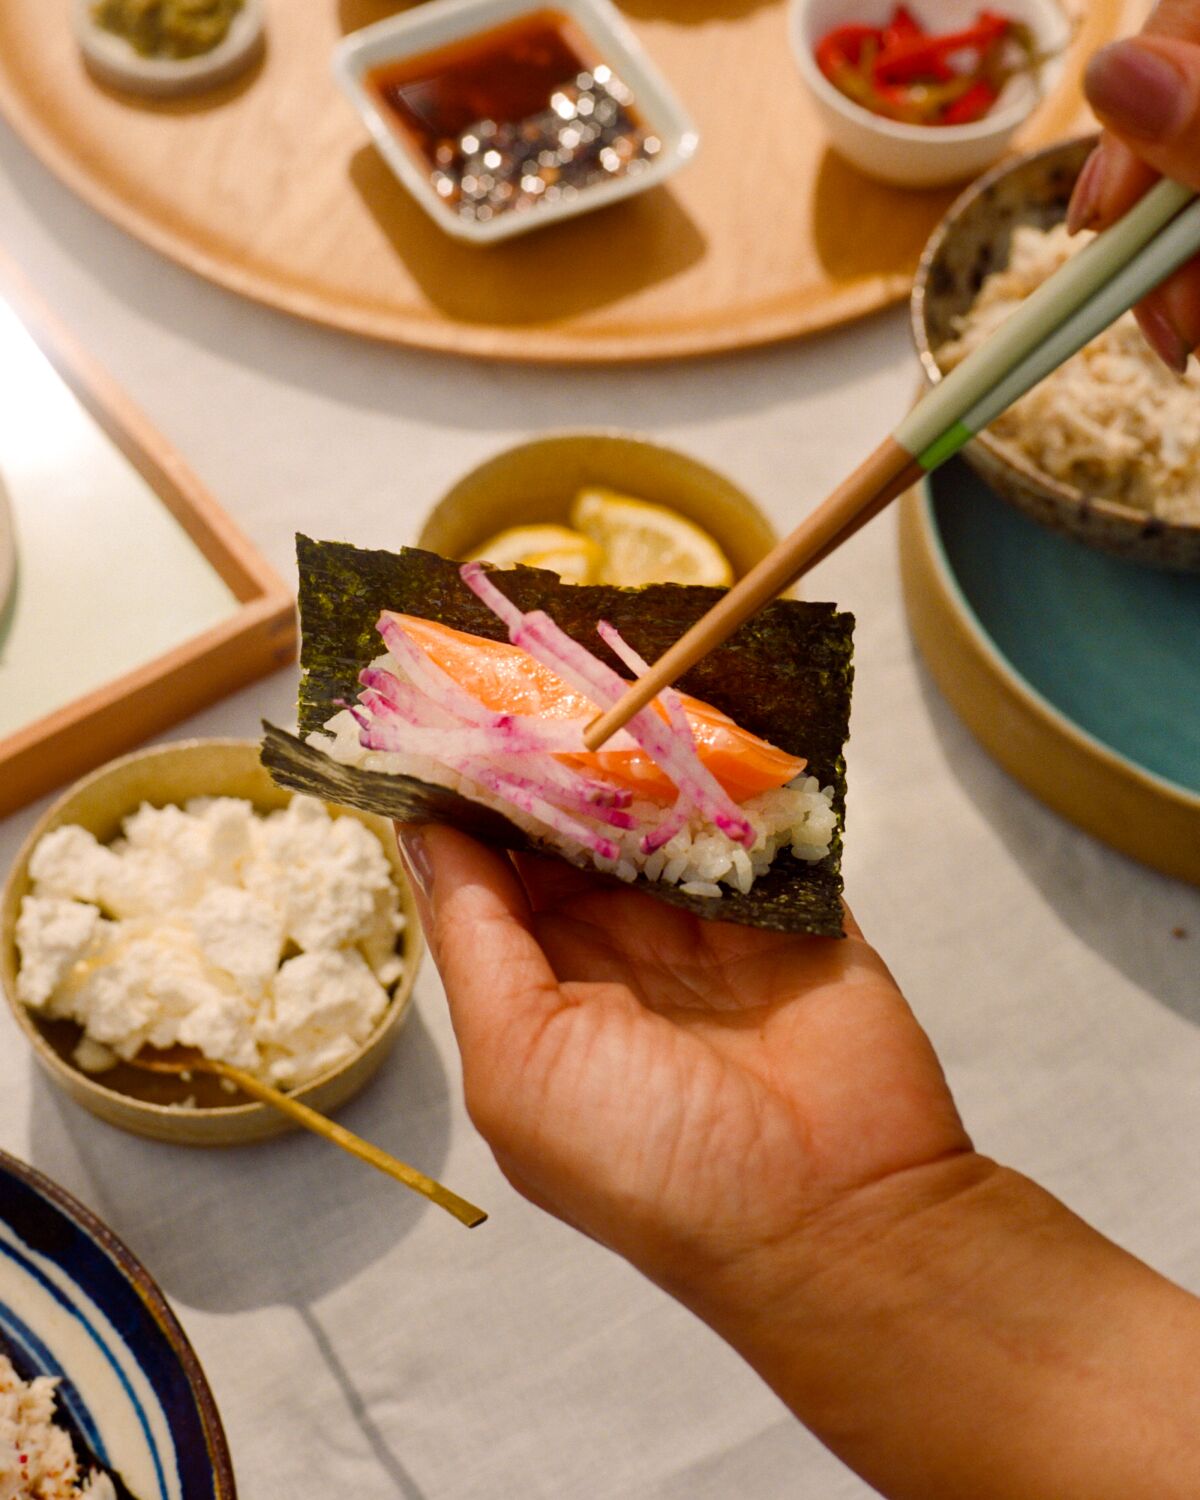 Homemade hand rolls are easy: Add two or three of any of your favorite fillings.